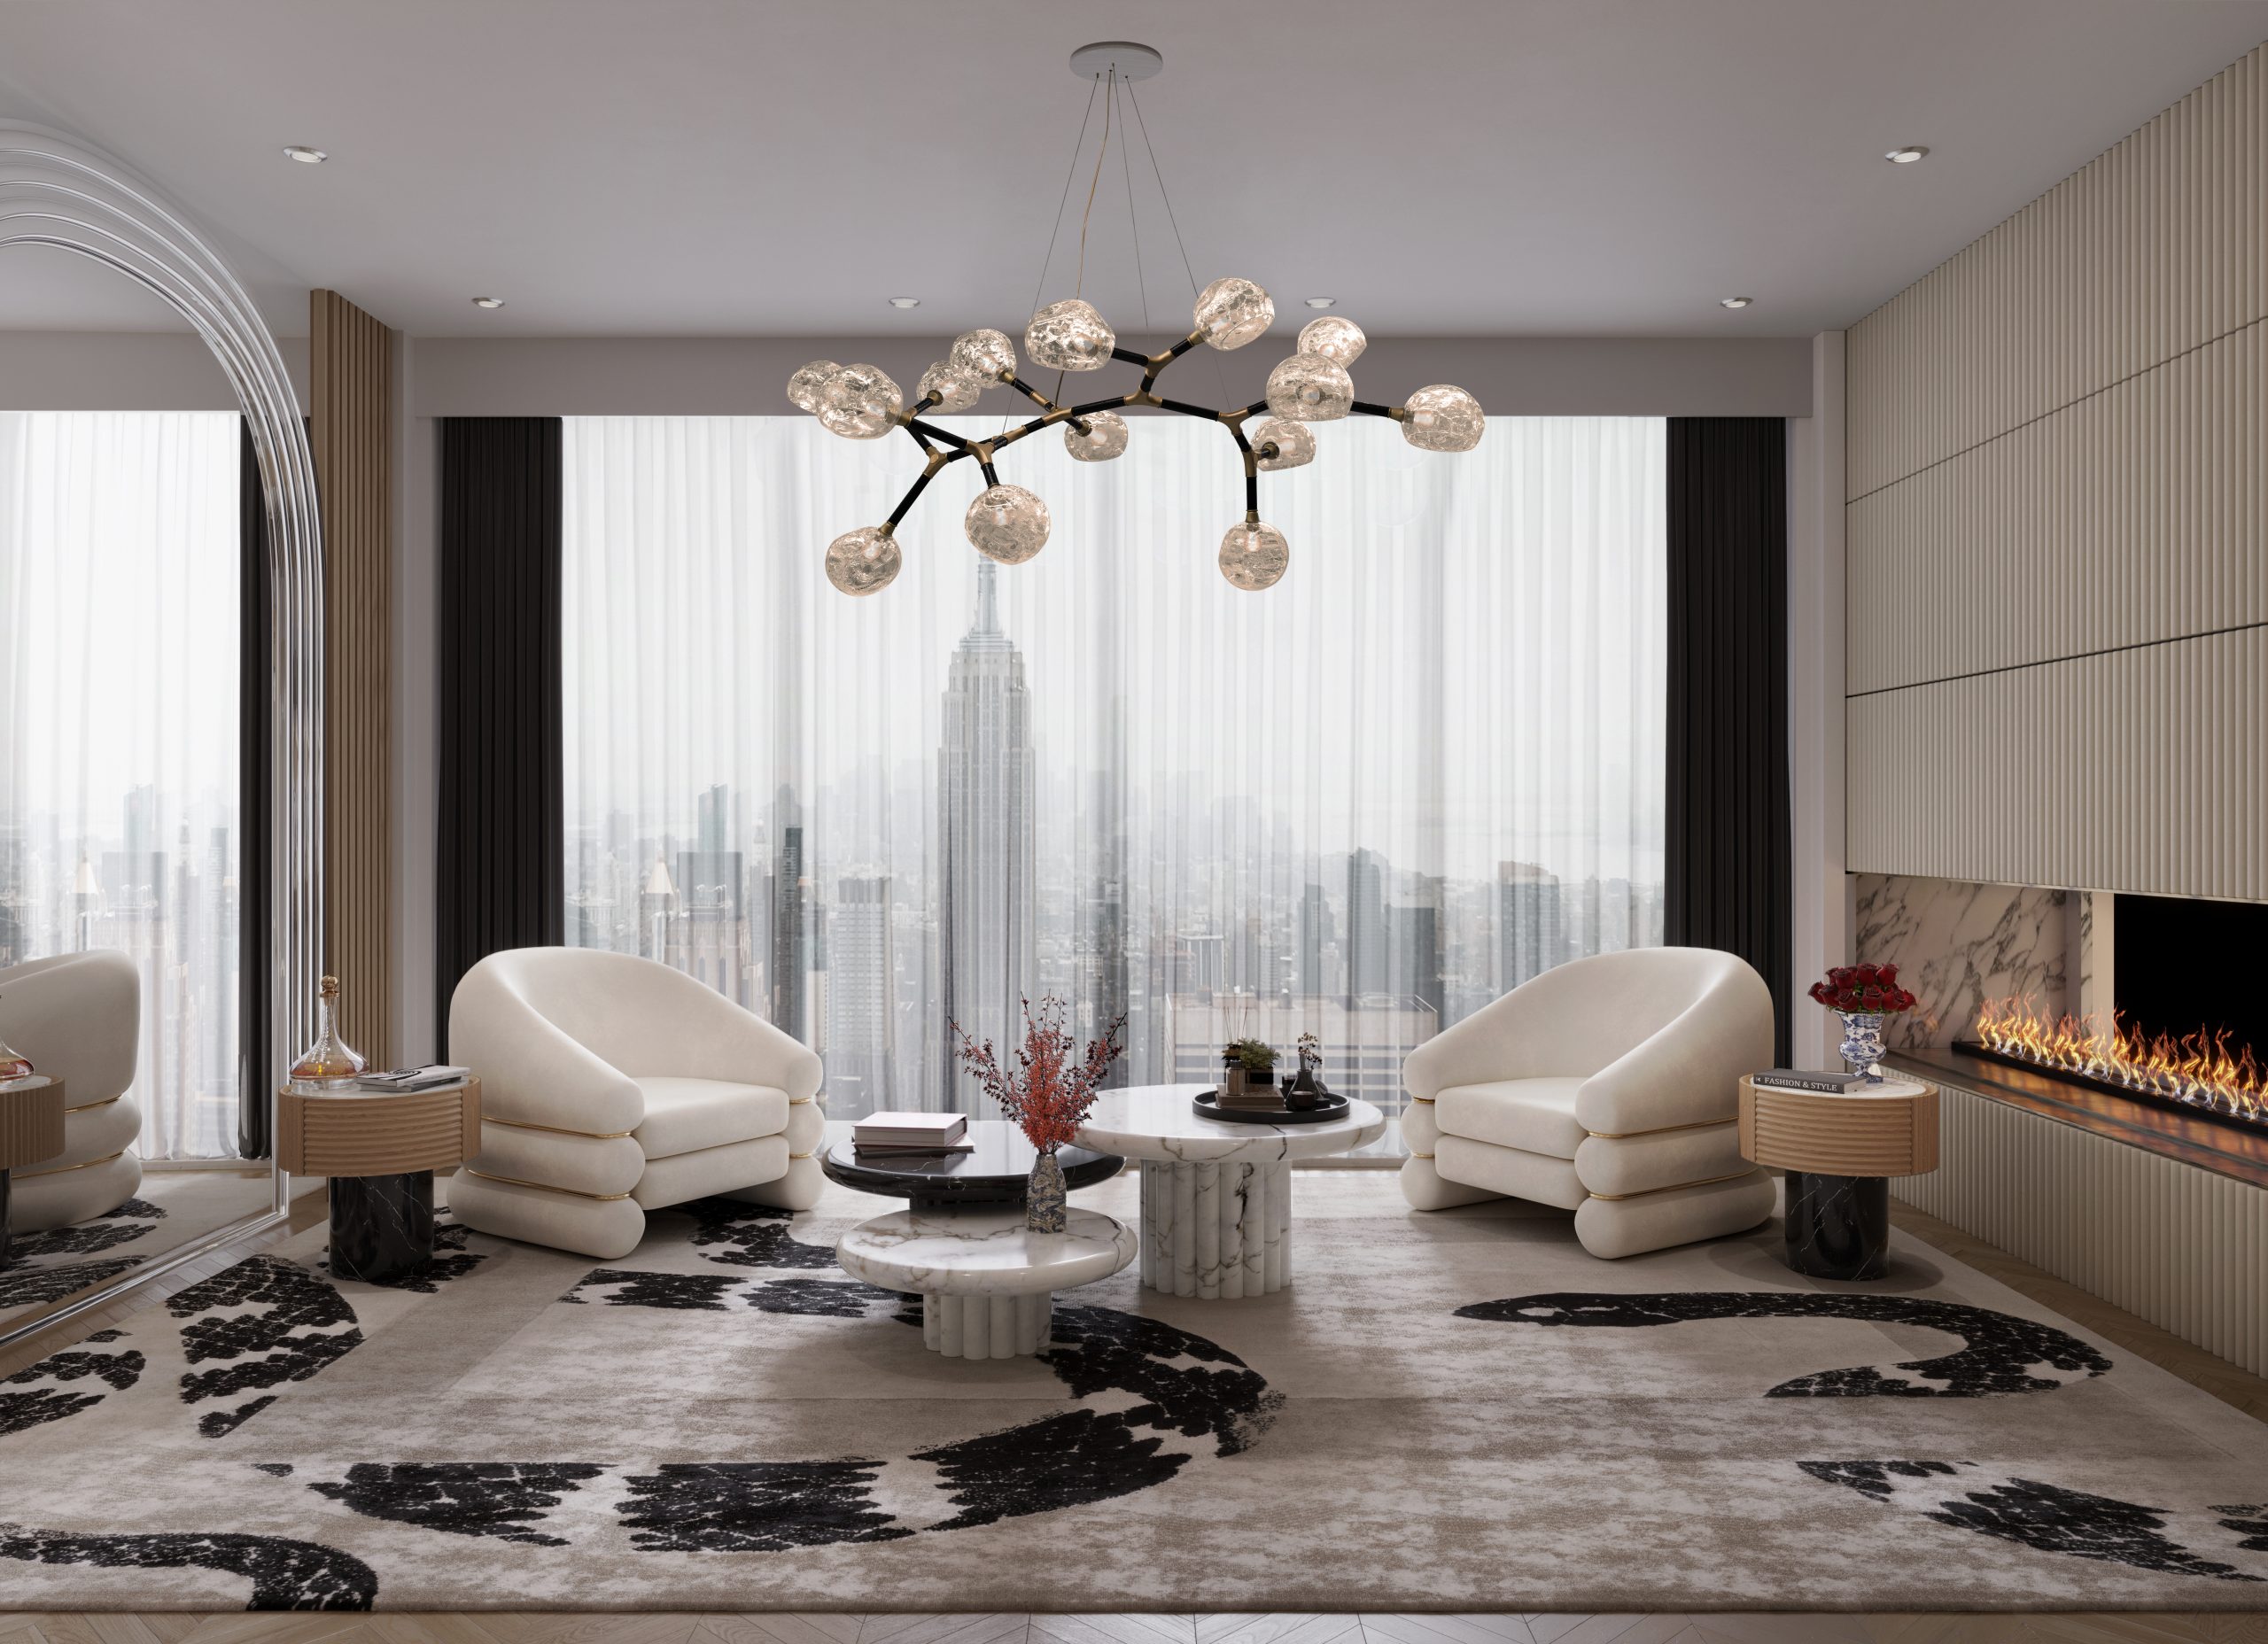 THE LUXURY OF CONTEMPORARY LIVING ROOM INSPIRATION